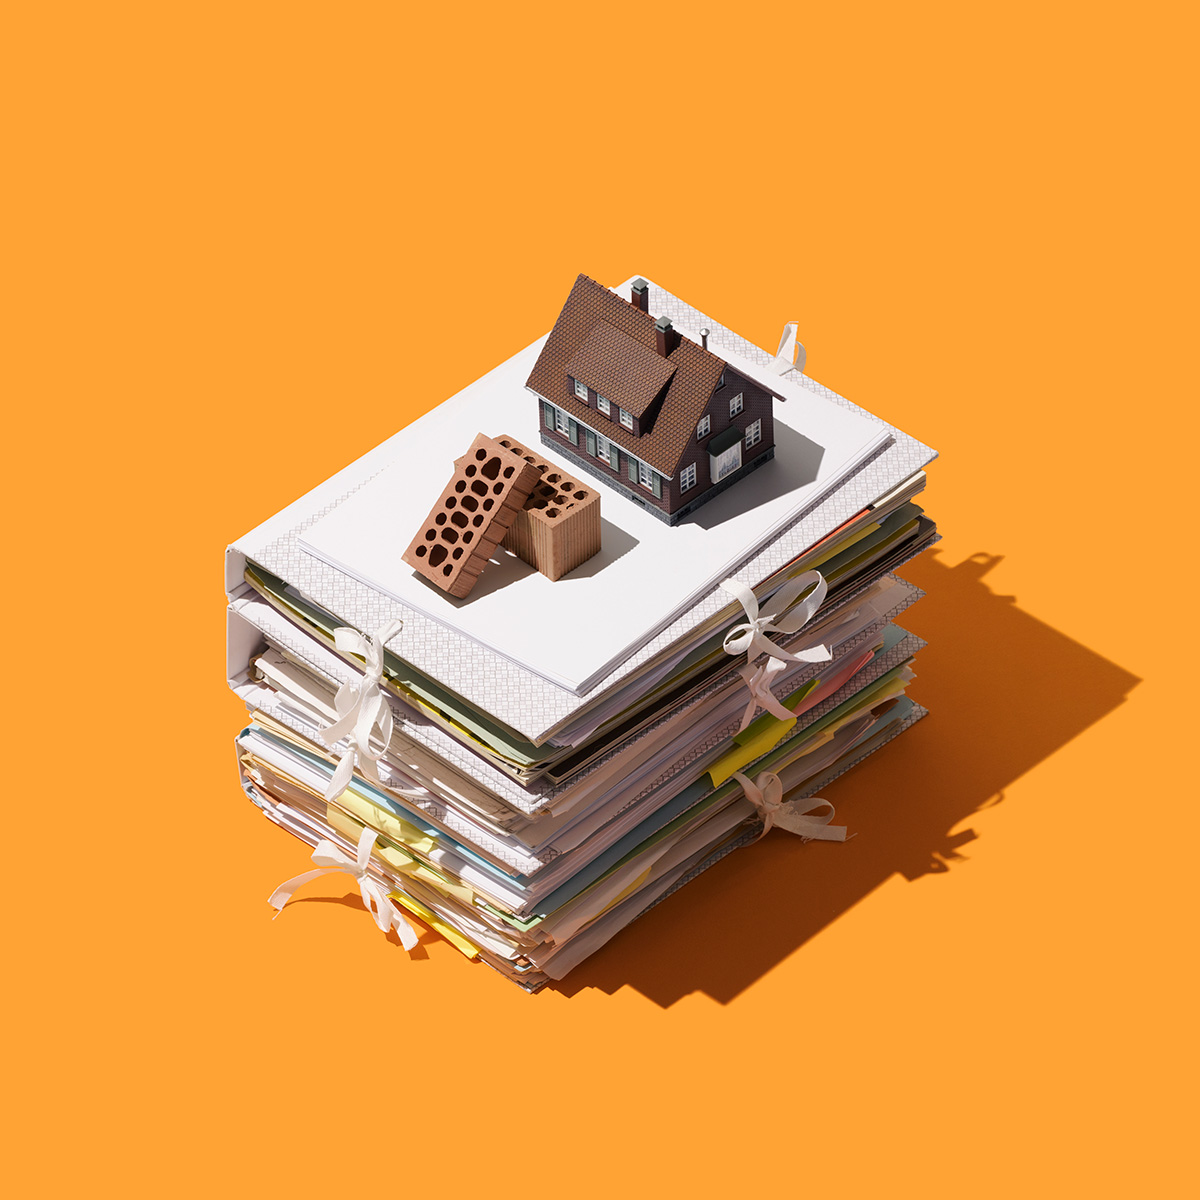 Conceptual home on a stack of papers